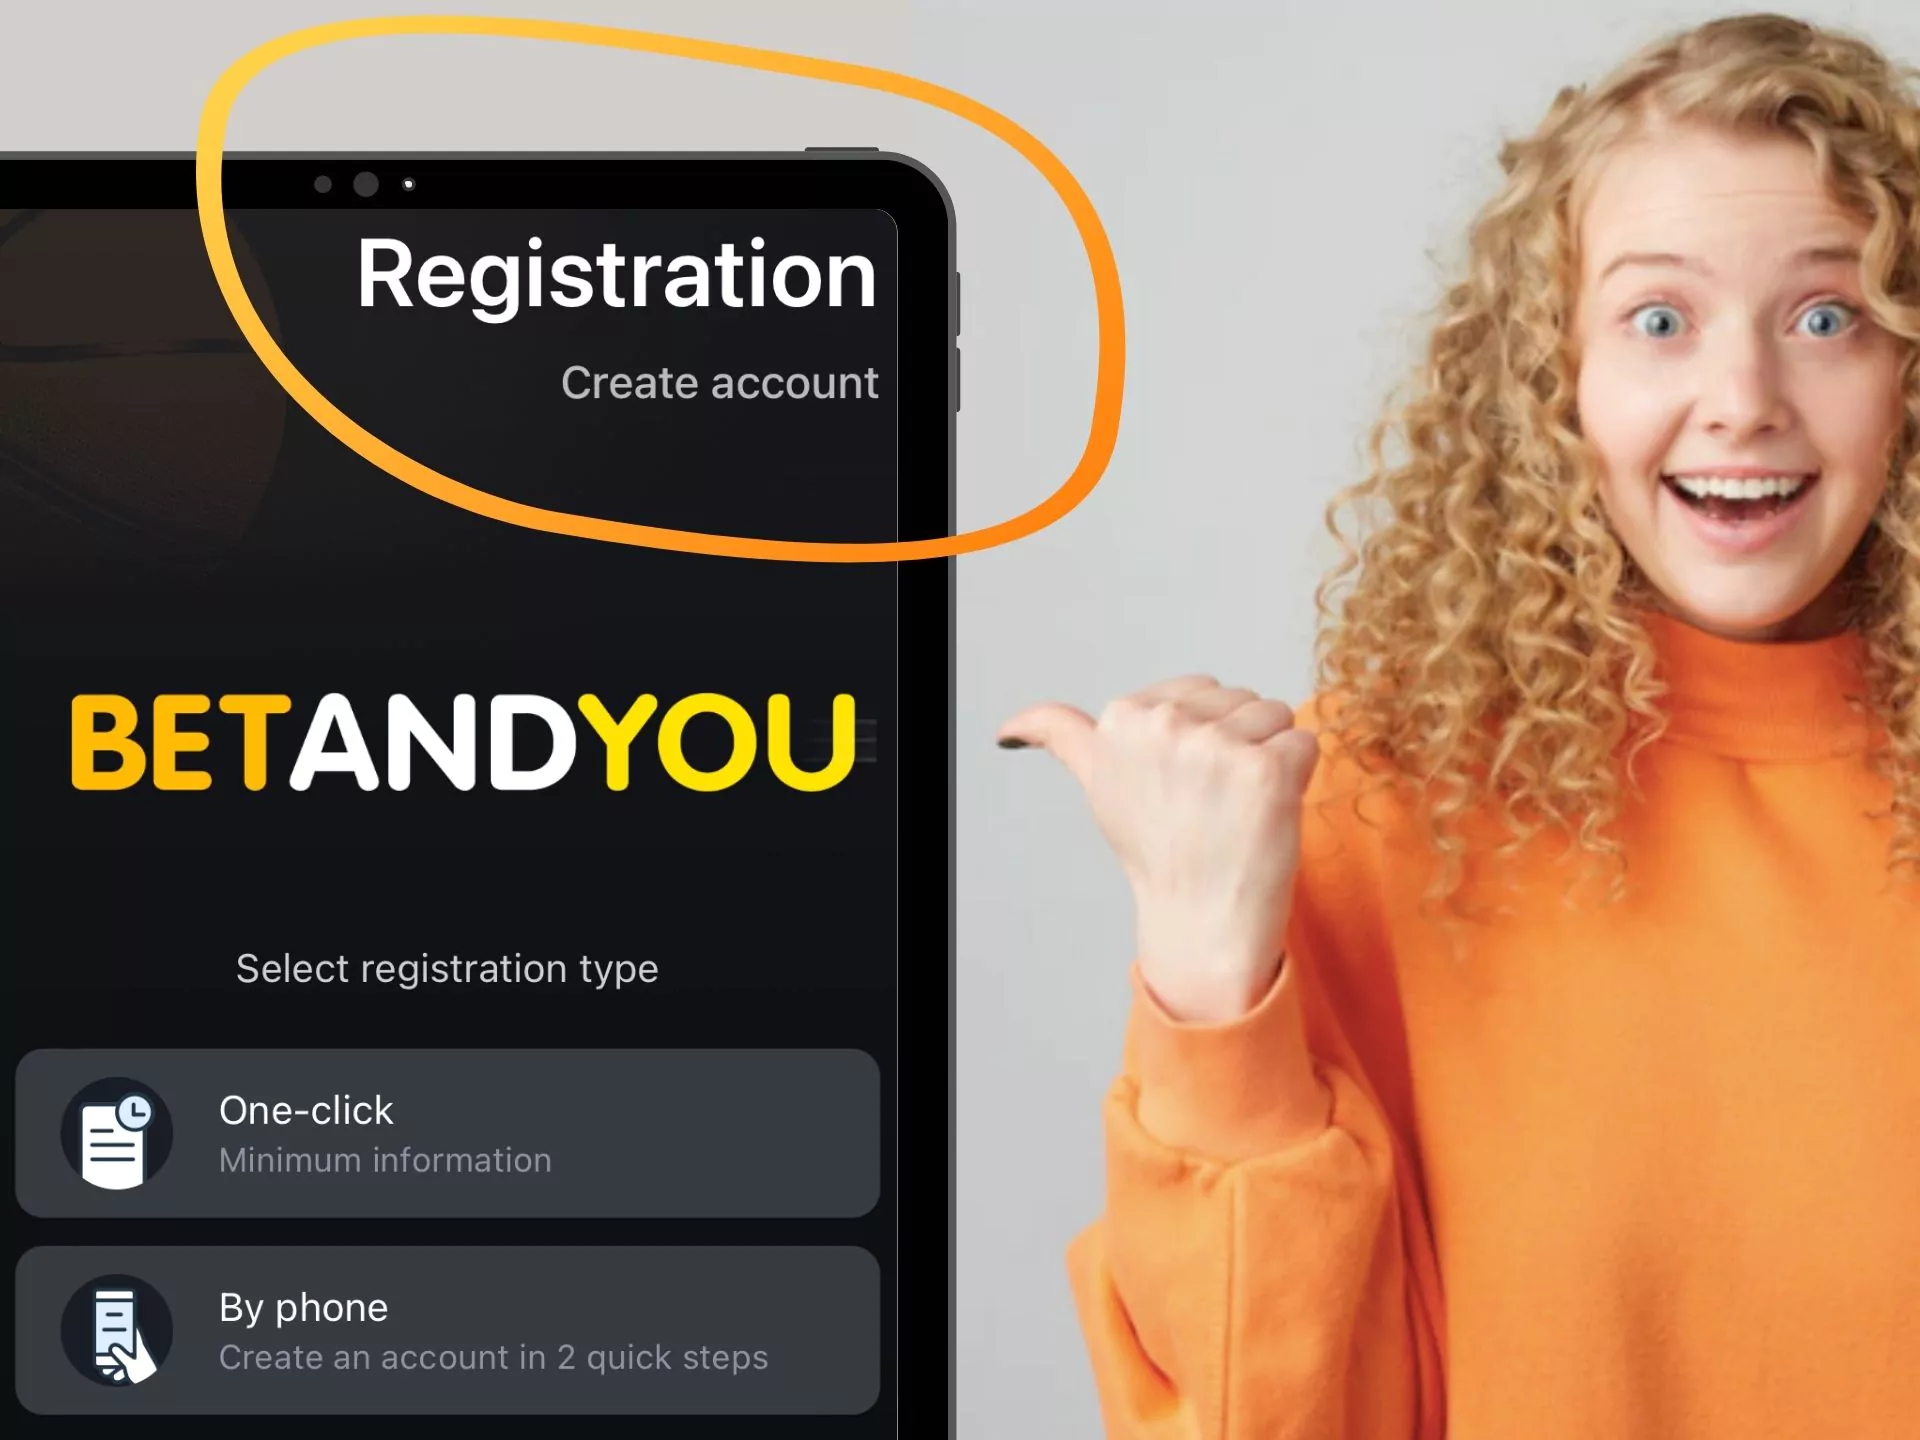 It takes several minutes to register at BetAndYou.